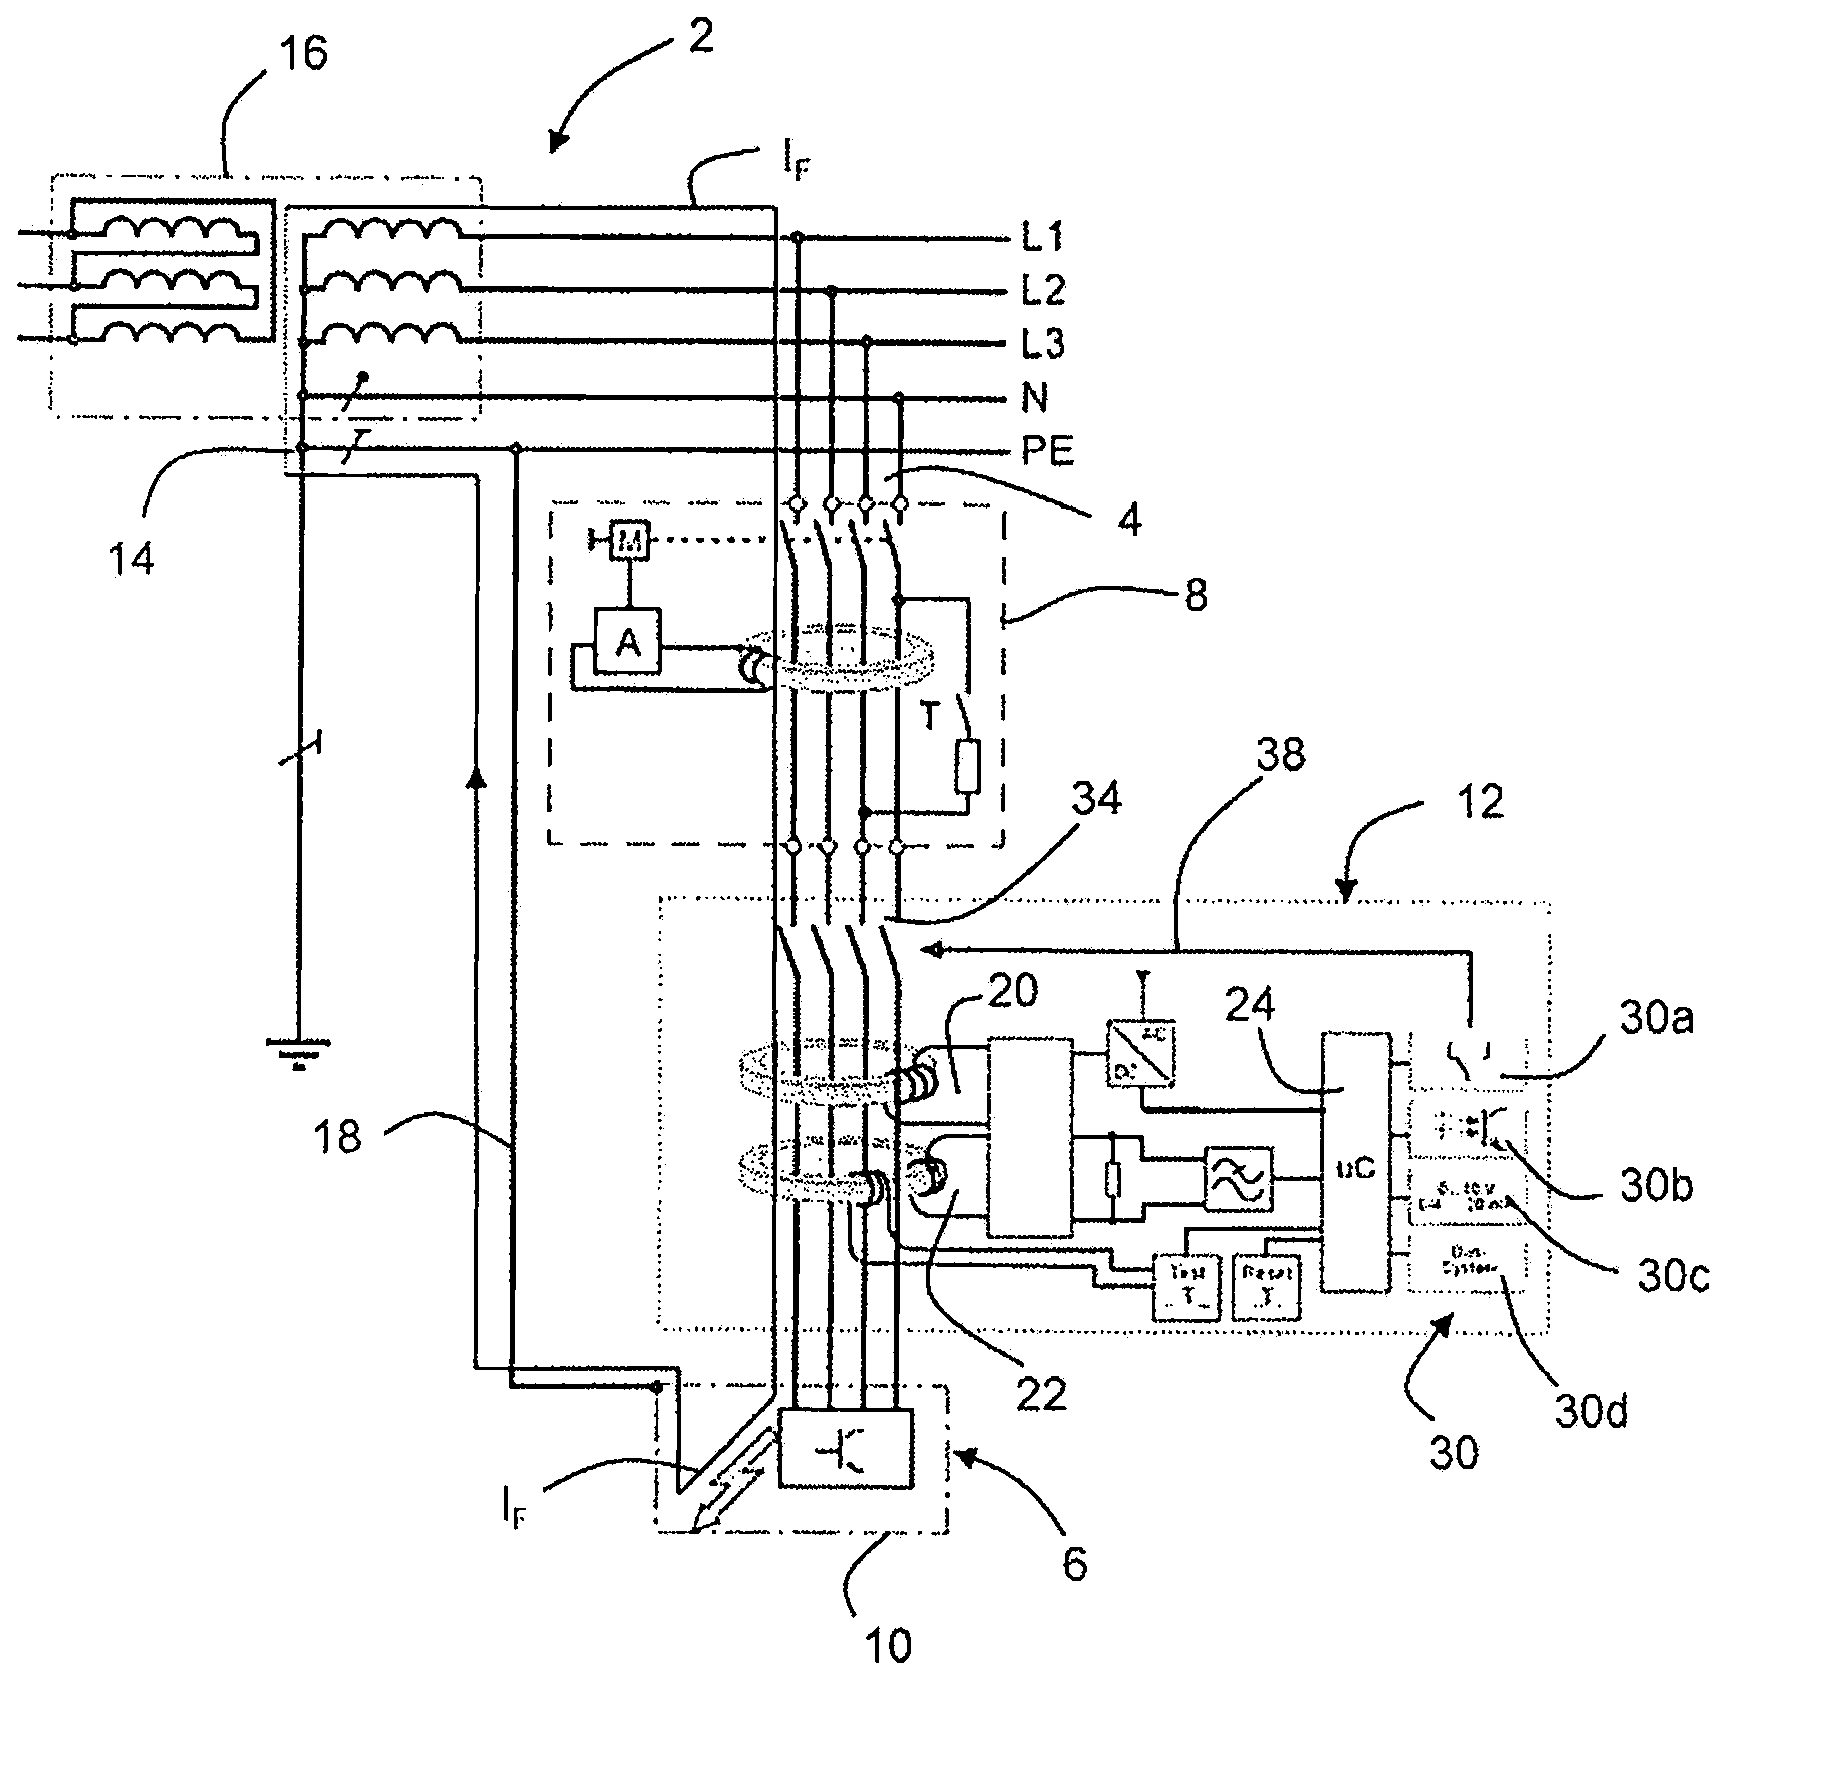 Electrical monitoring device and method for safeguarding the protective function of a type a residual current device (RCD)